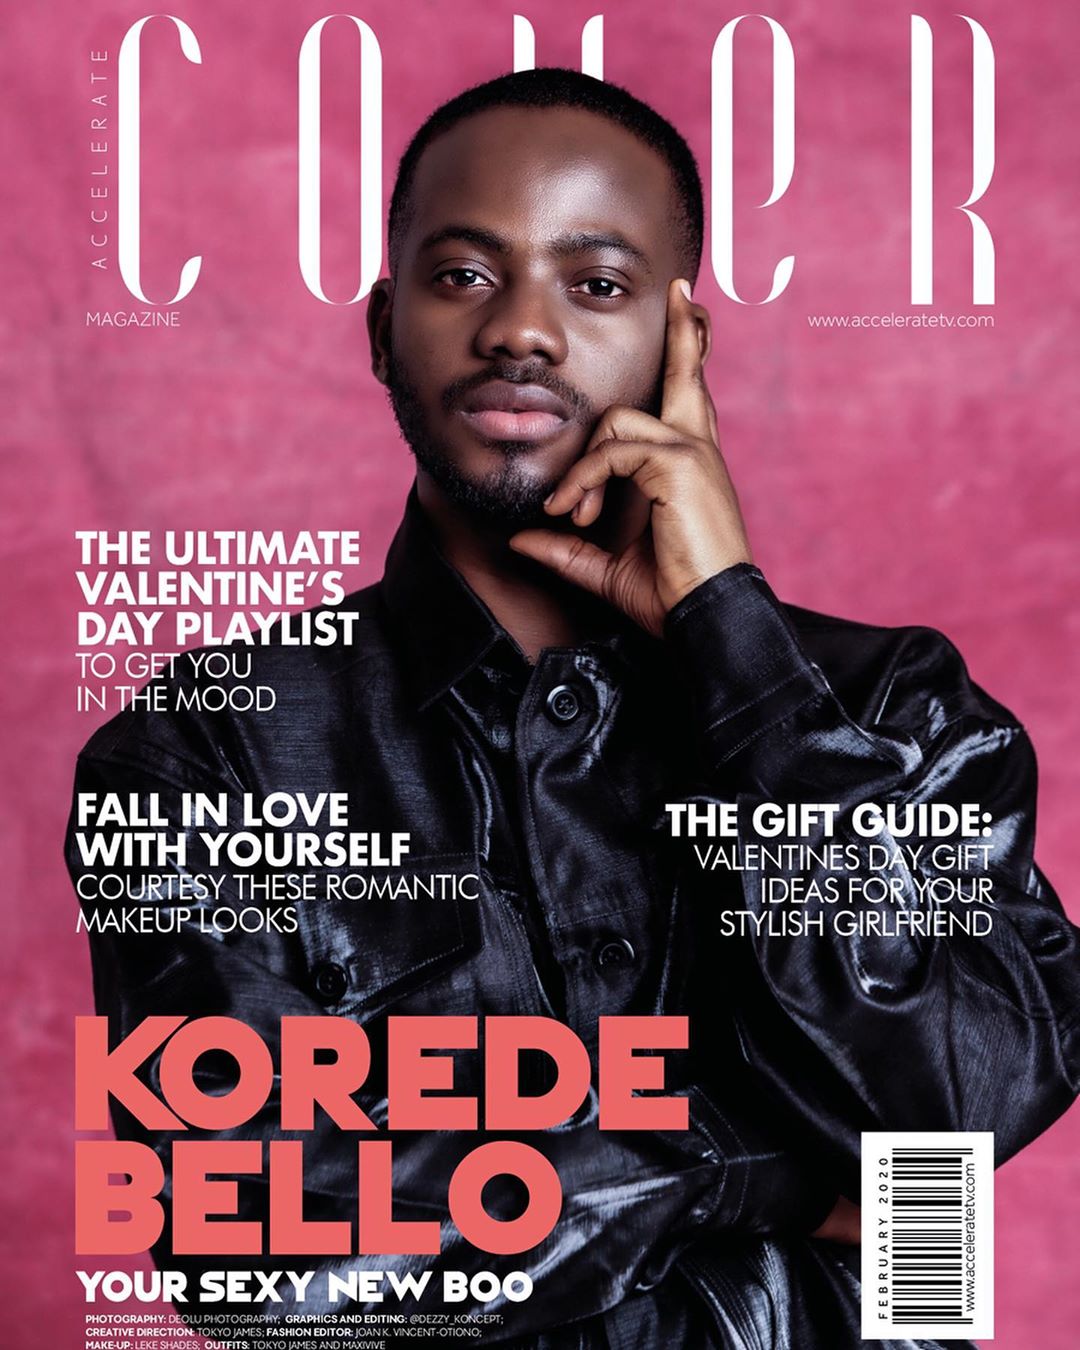 Your Sexy New Boo - Korede Bello is on Accelerate TV's The Cover |  BellaNaija